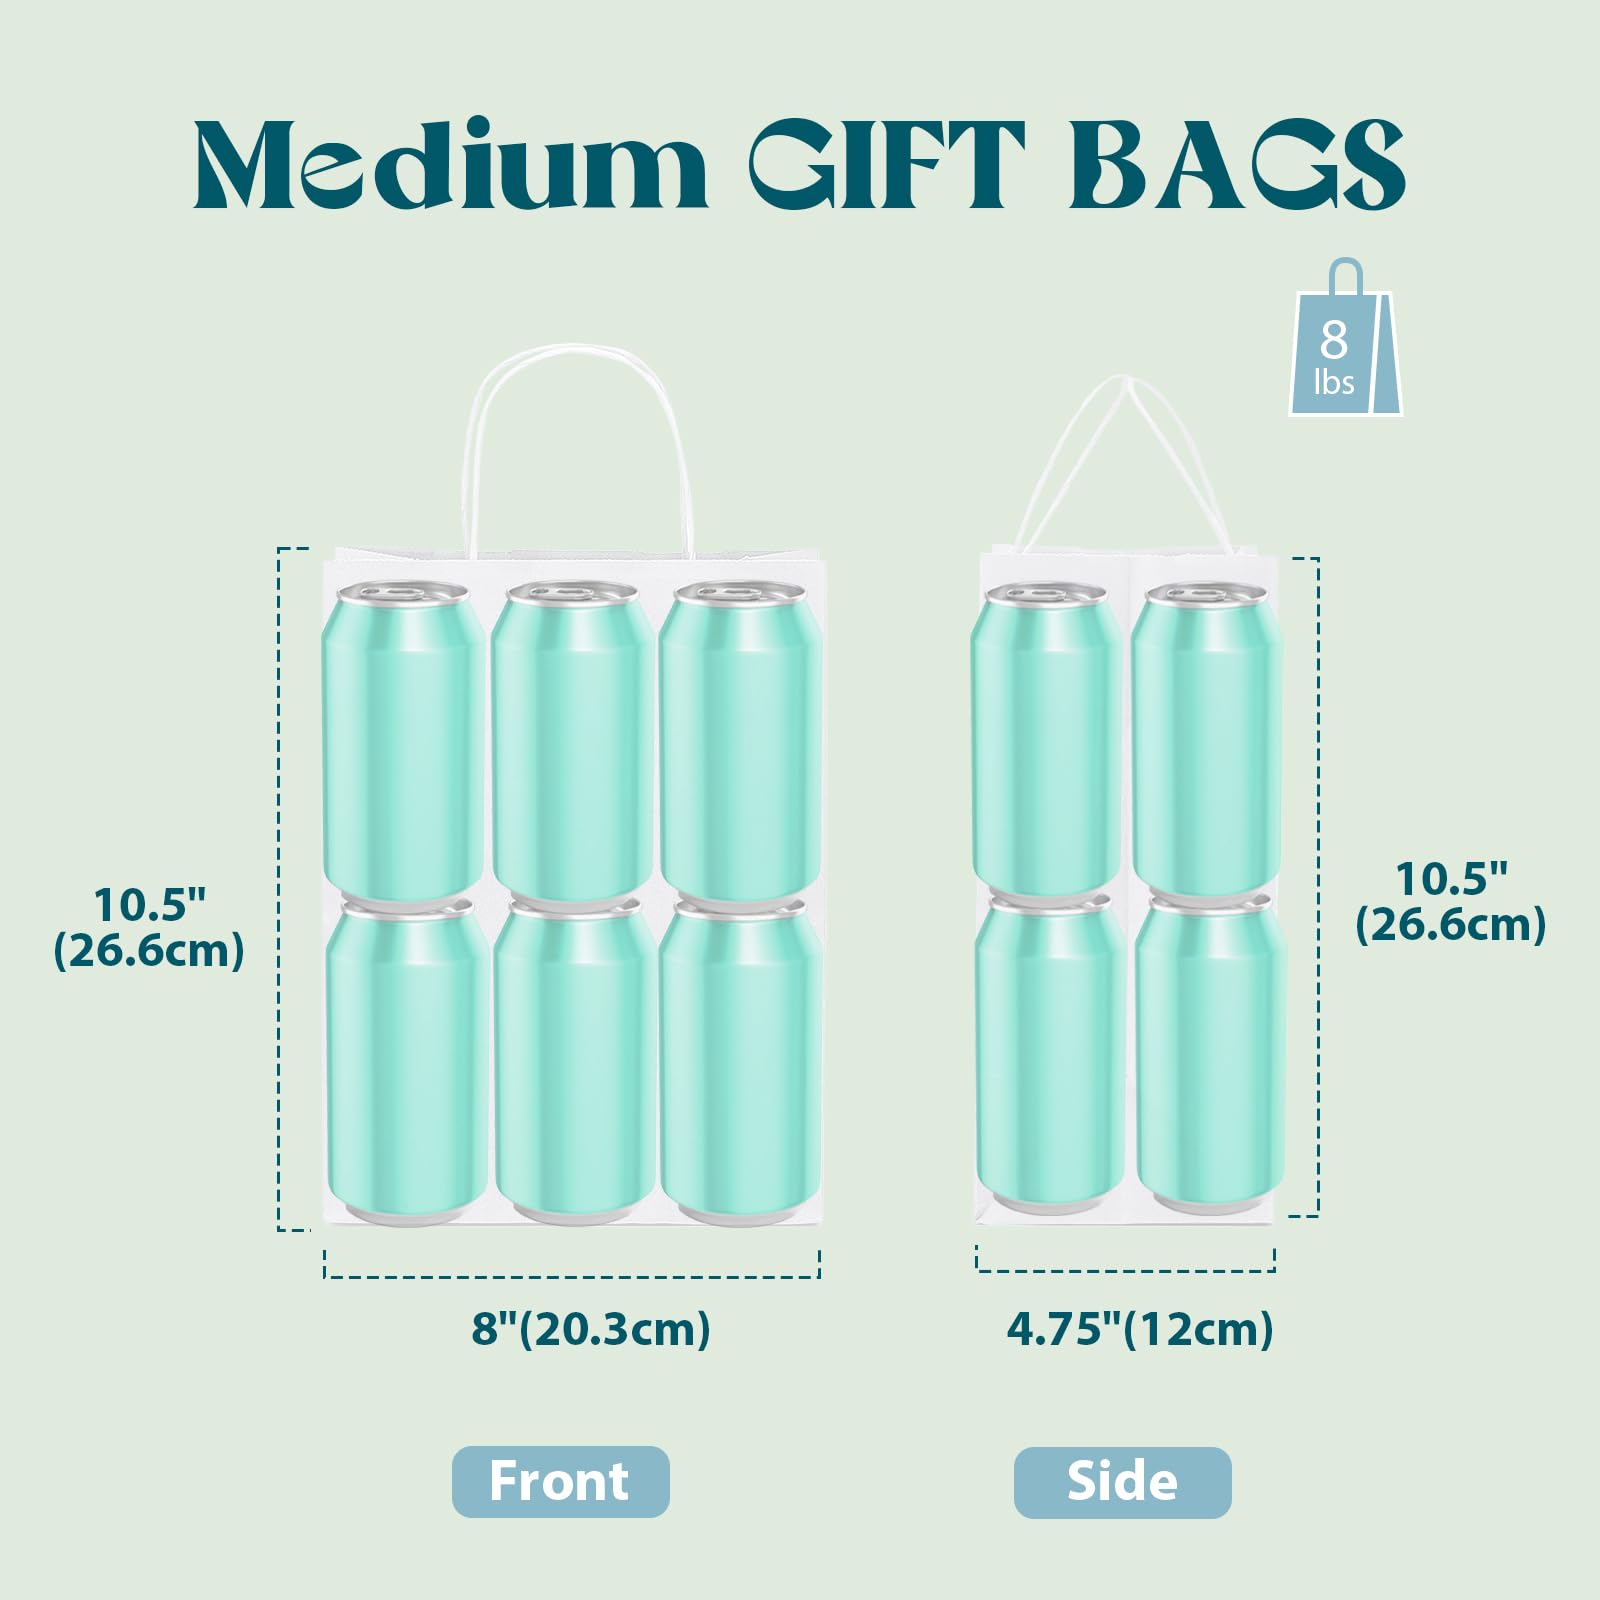 MESHA White Gift Bags 5.25x3.75x8 Inches 50Pcs & 8x4.75x10.5 Inches 50Pcs White Paper Bags with Handles Small Shopping Bags,Wedding Party Favor Bags